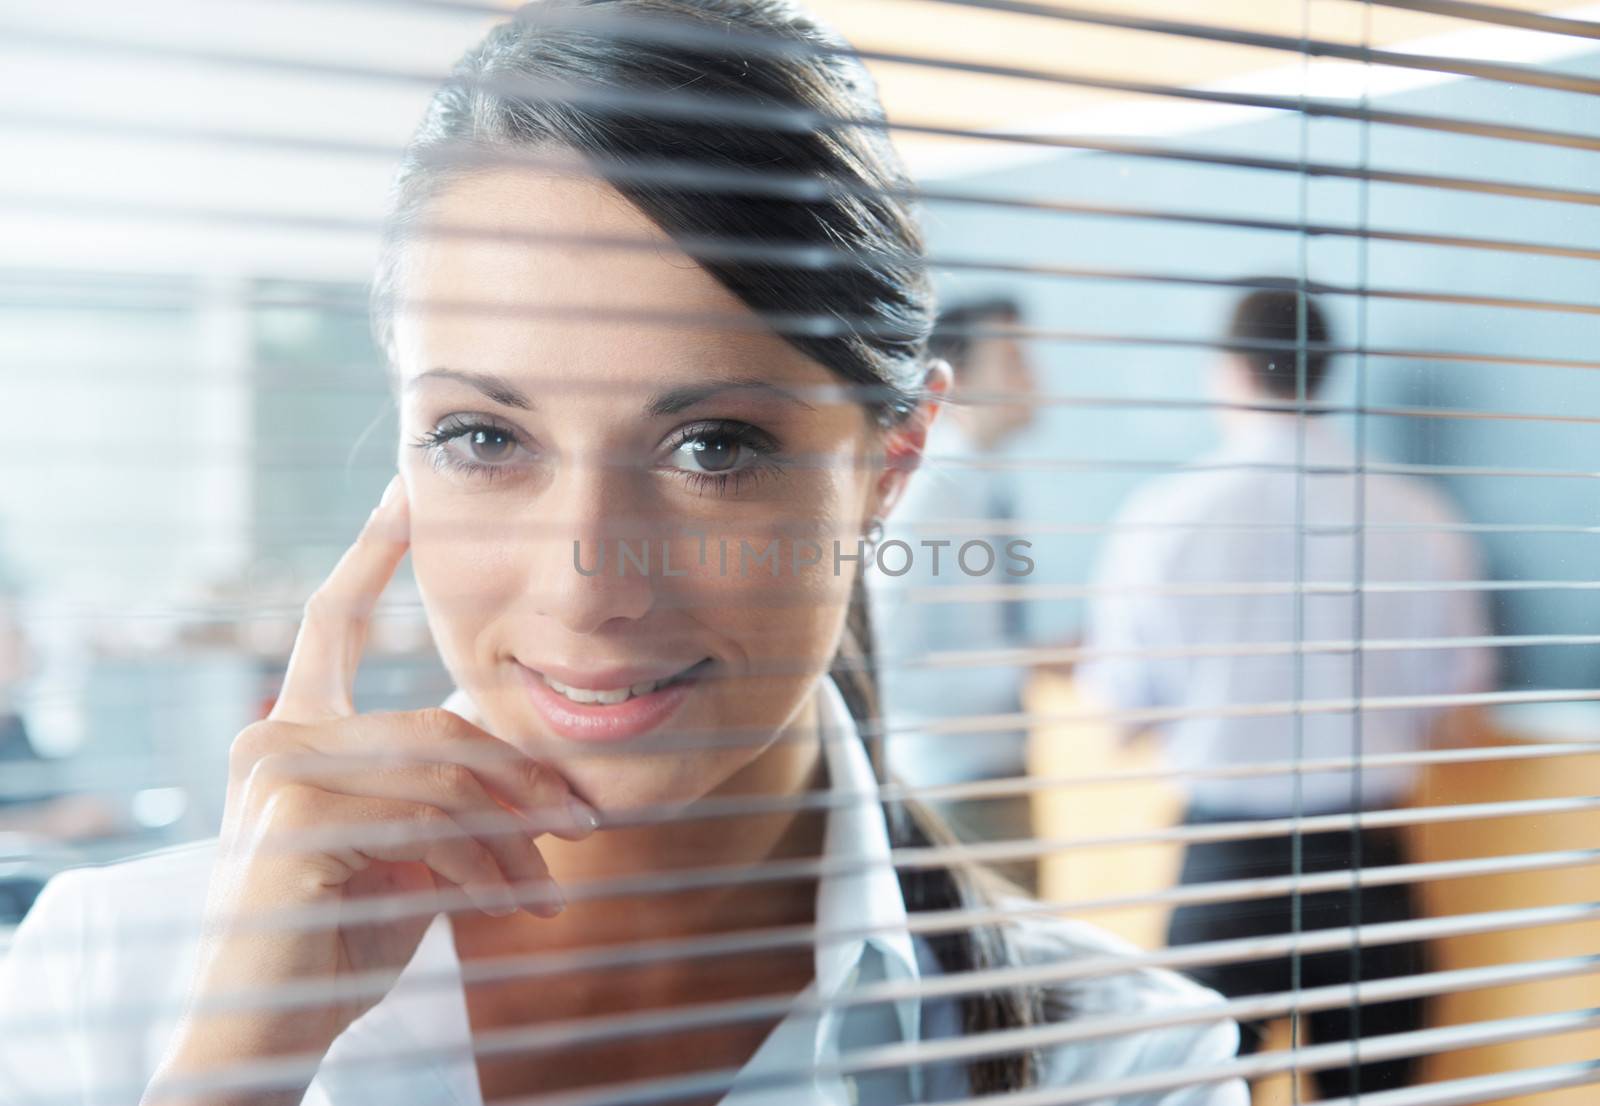 A smiling executive standing at a window in his office